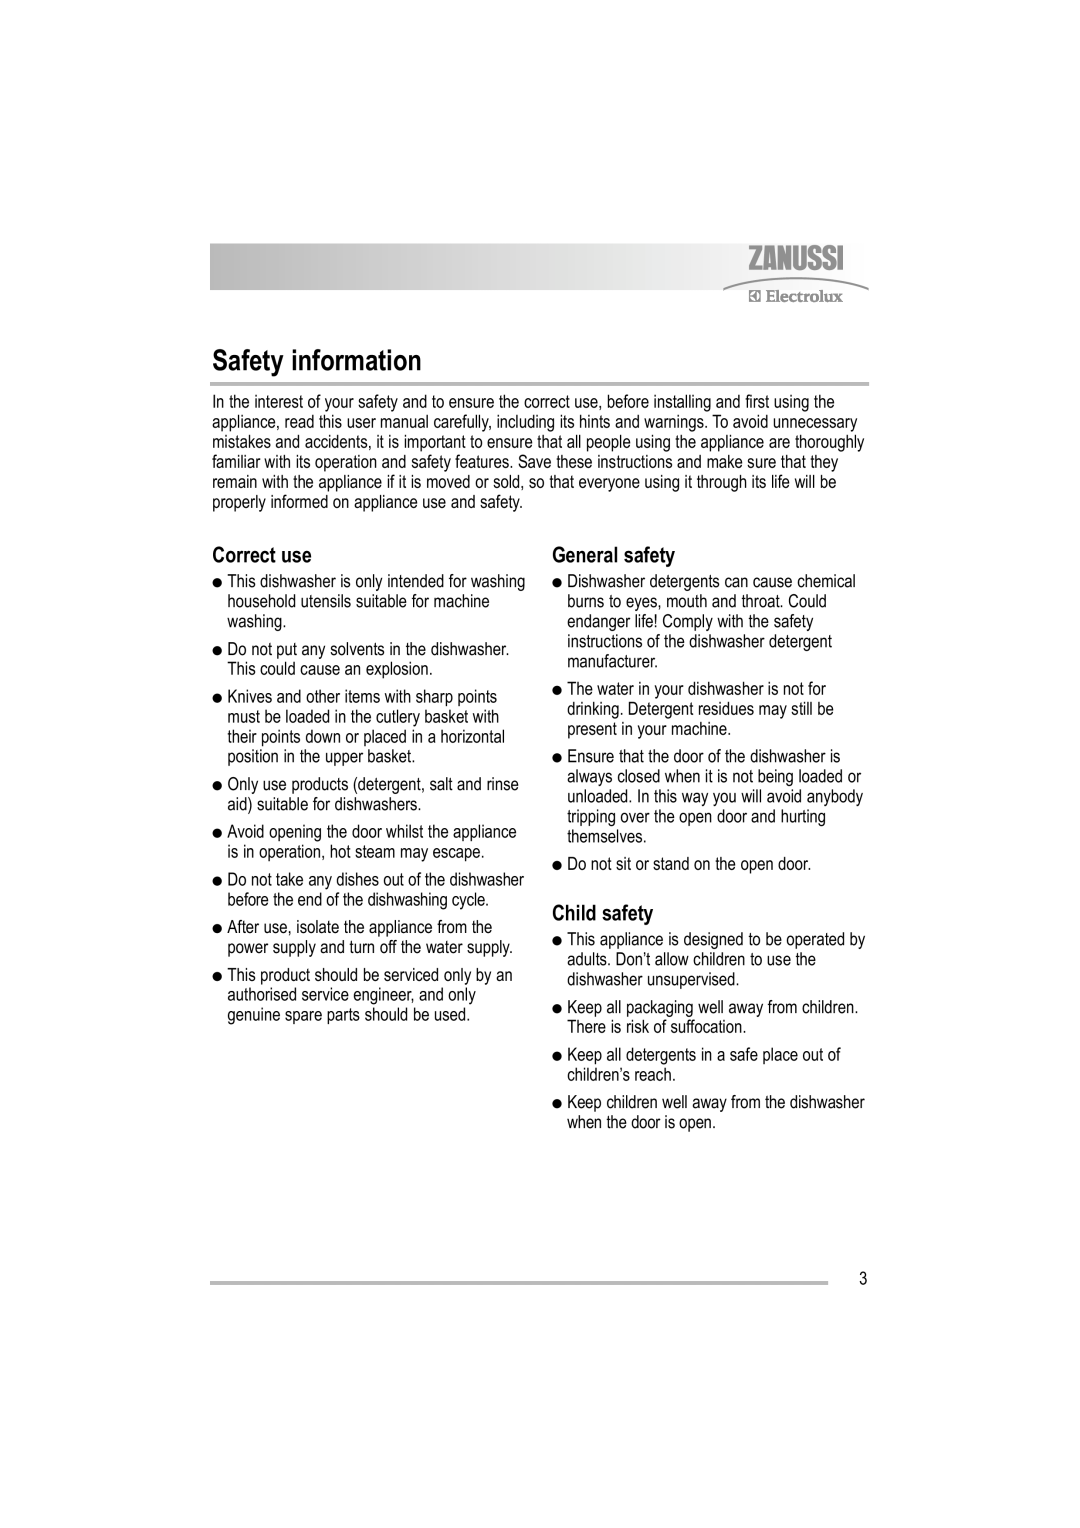 Electrolux ZDF 501 user manual Safety information, Correct use, General safety, Child safety 